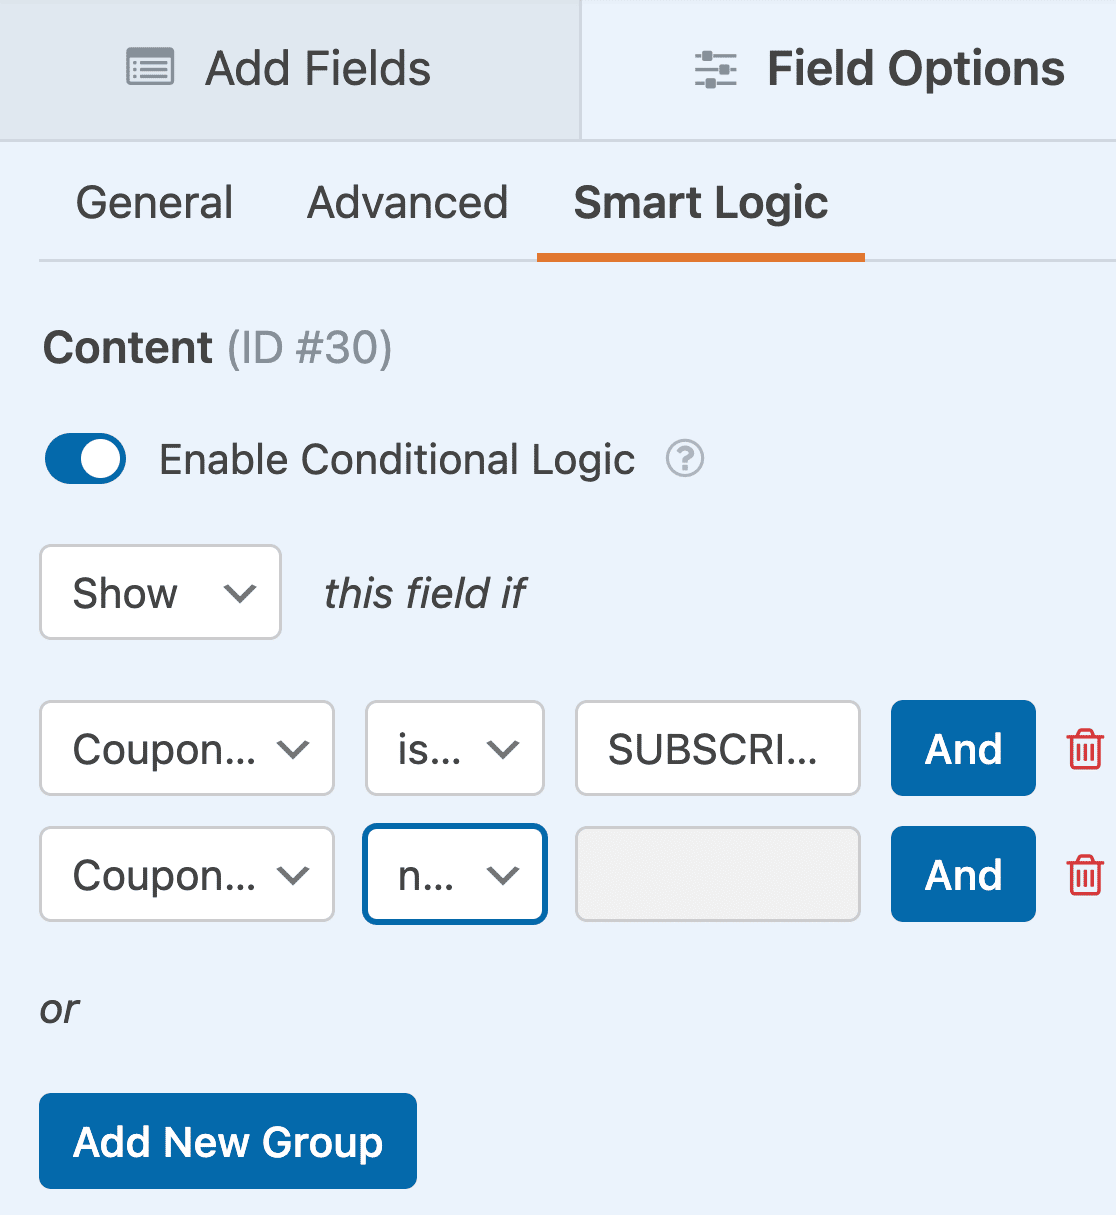 Creating a conditional logic rule so the coupon failure message doesn't show if the coupon field is empty